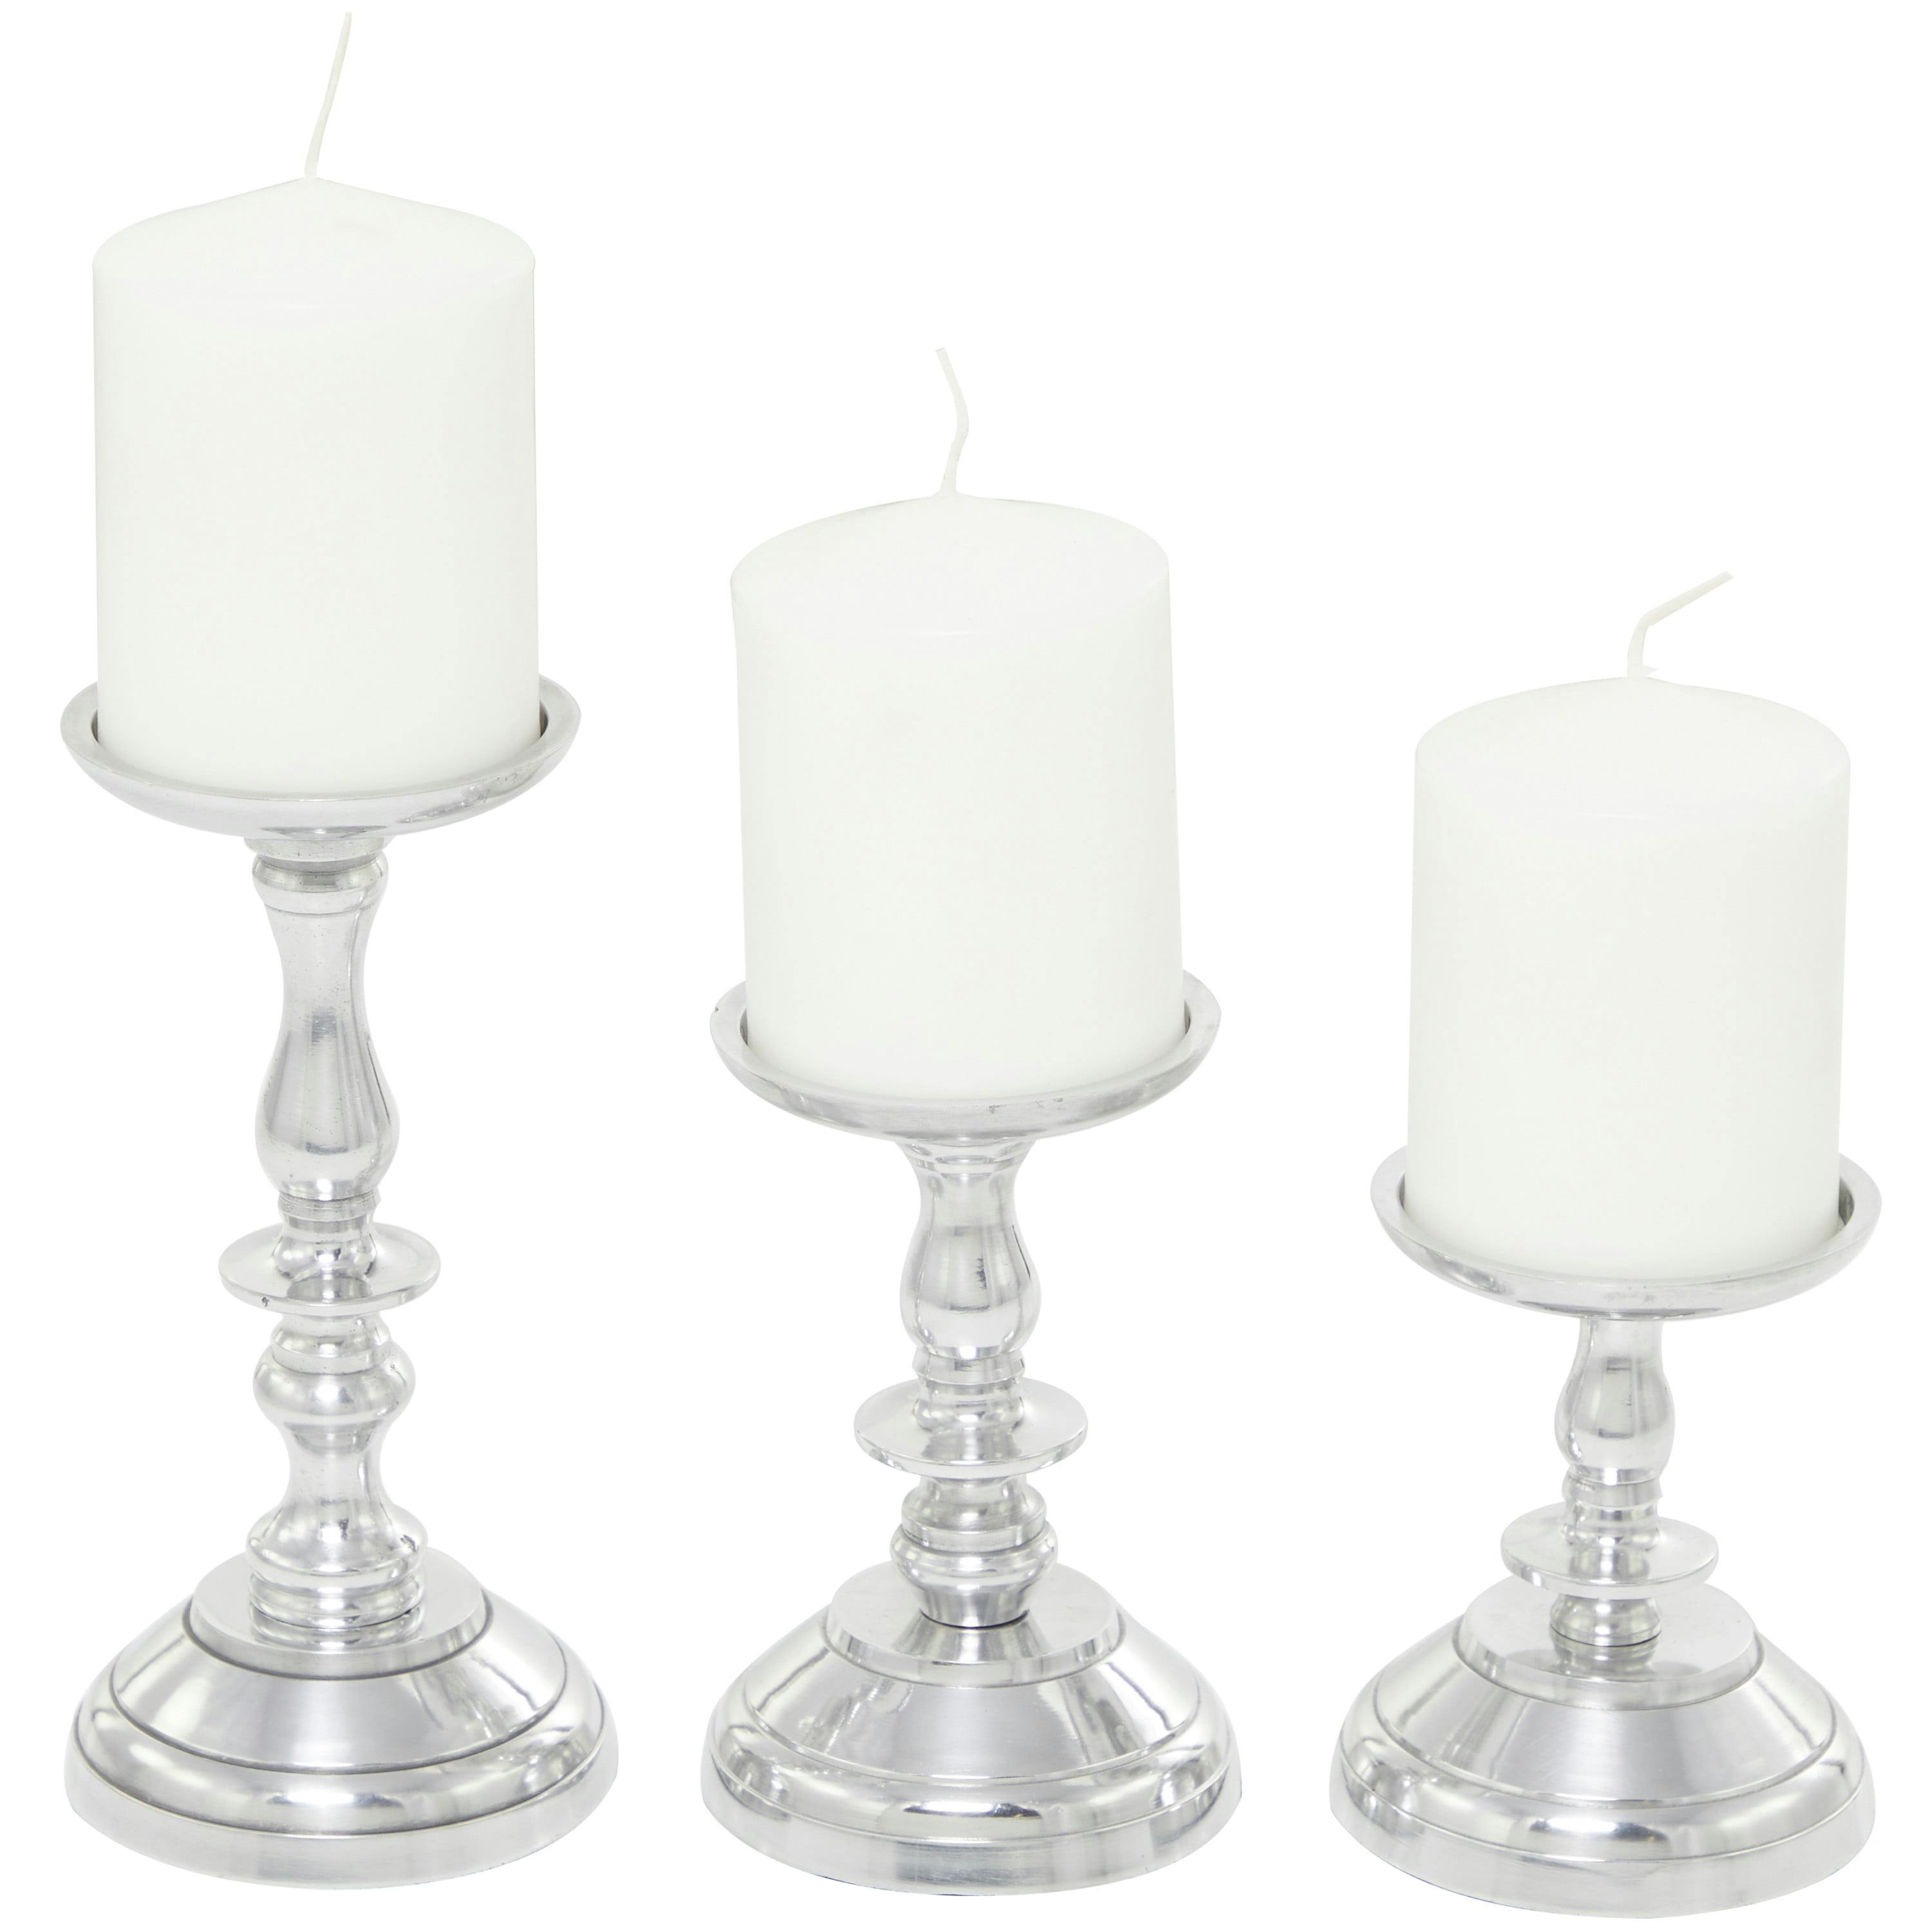 Elegant Traditional Aluminum 3-Piece Candle Holder Set in Polished Silver